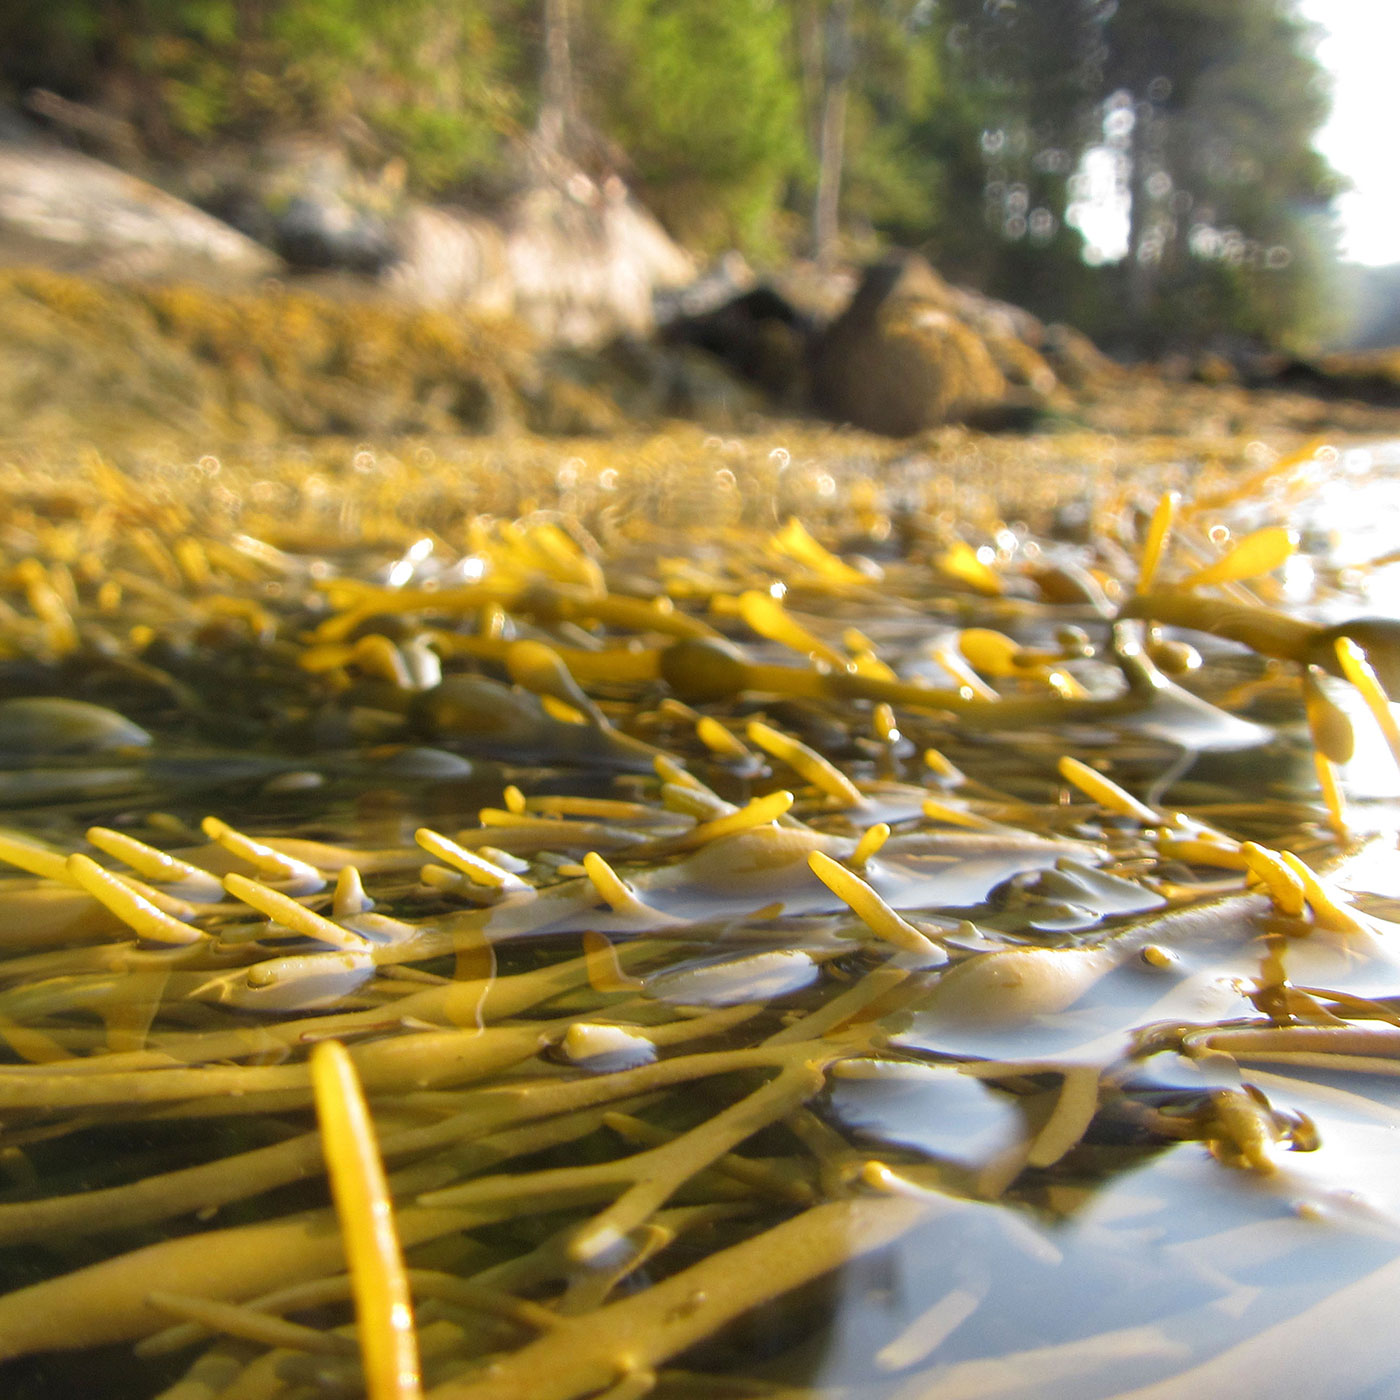 A Fish Called Rockweed